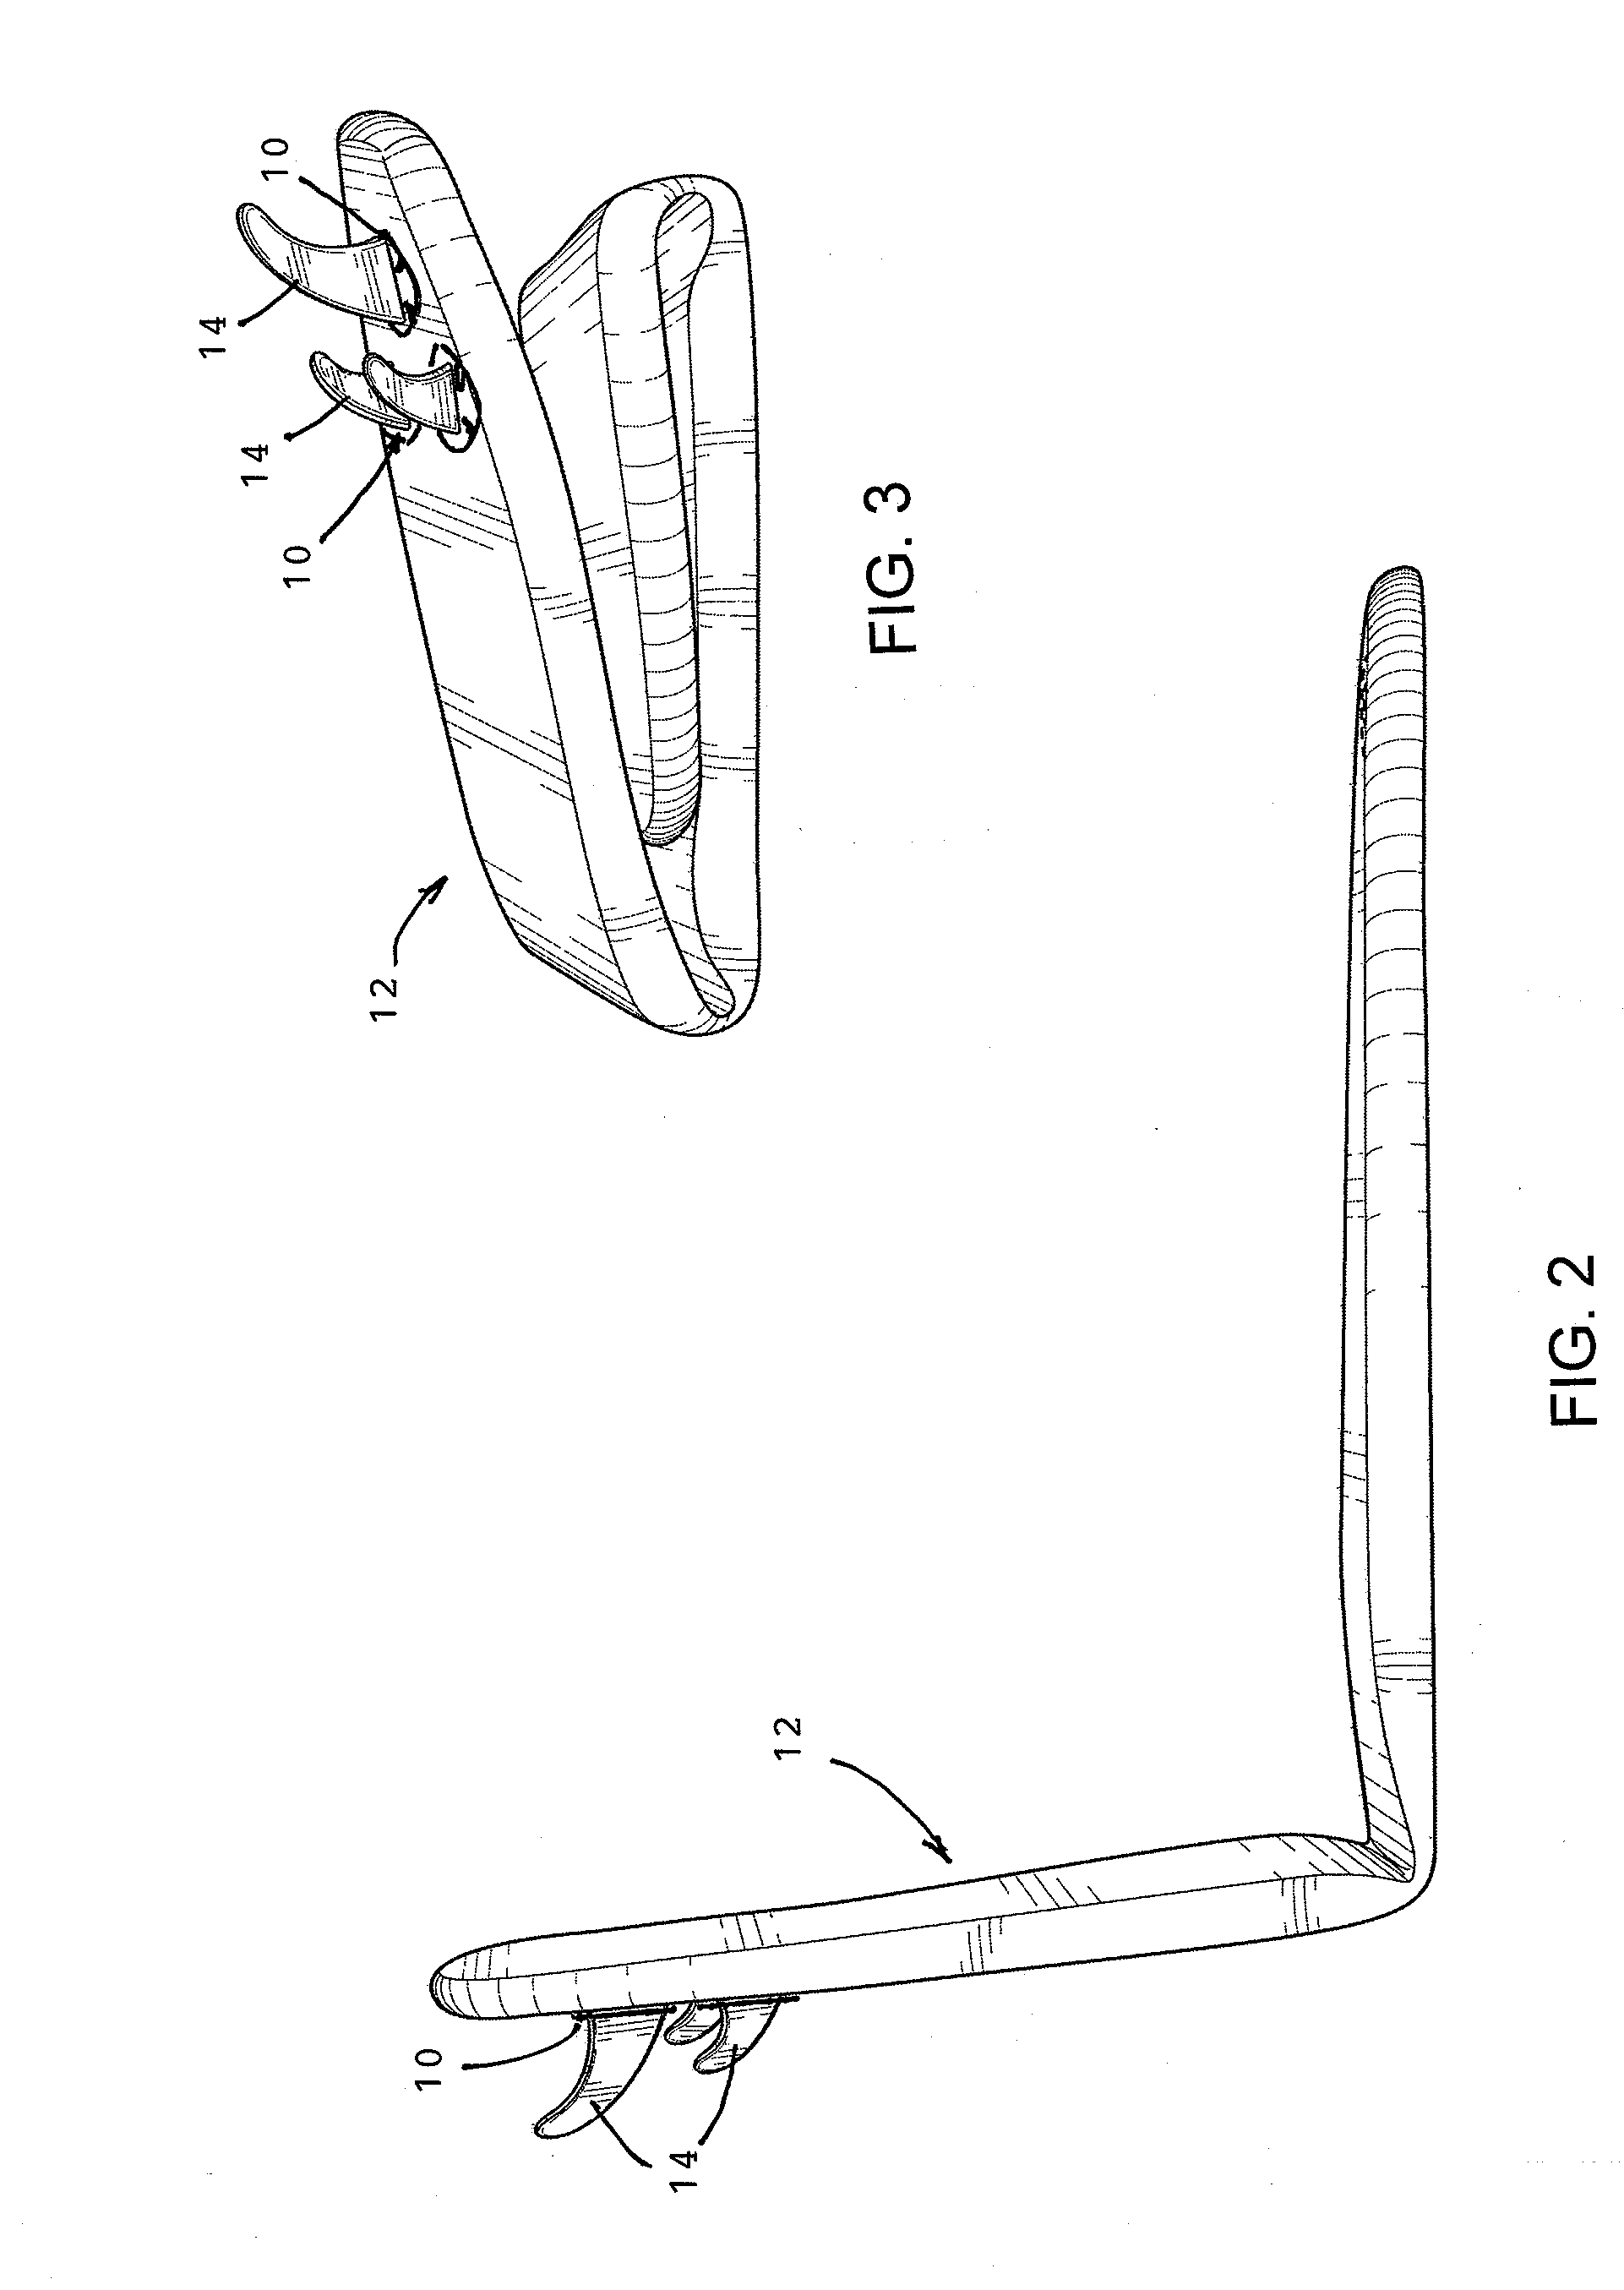 System for mounting an object on a flexible or curved surface